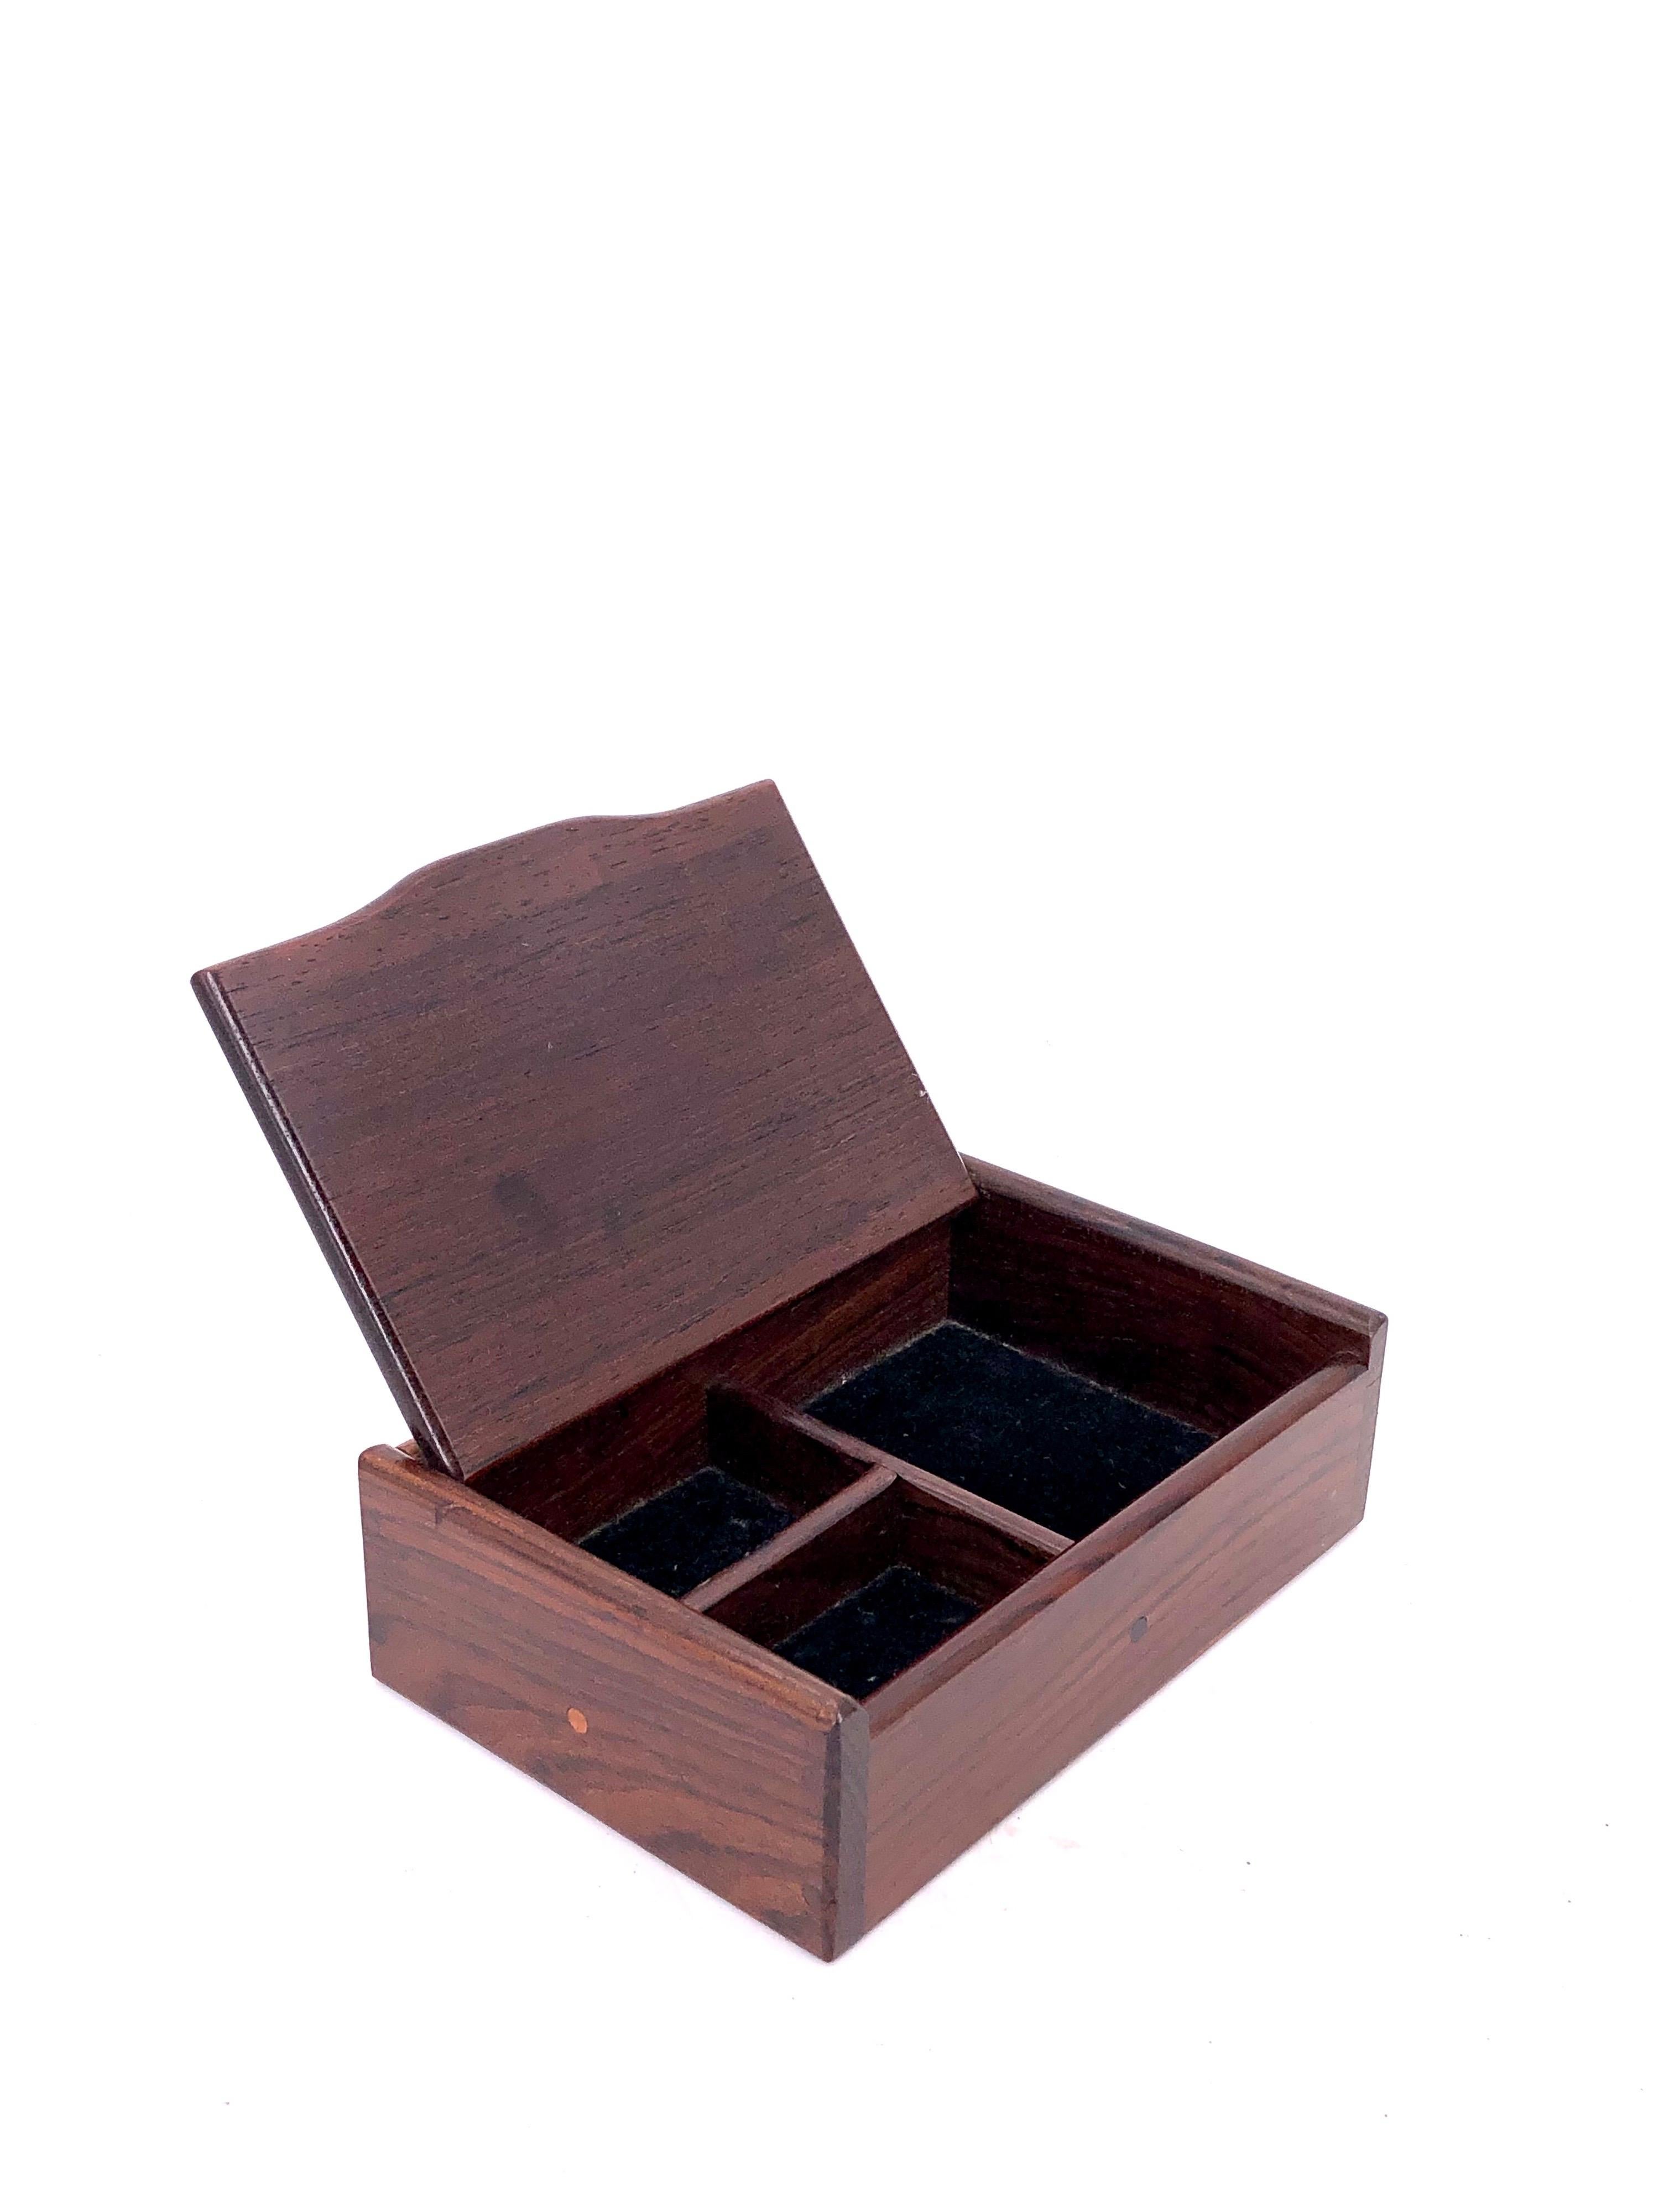 Beautiful solid rosewood jewelry box, nice handcrafted signed and dated 2000. Signed by Rodolfo.